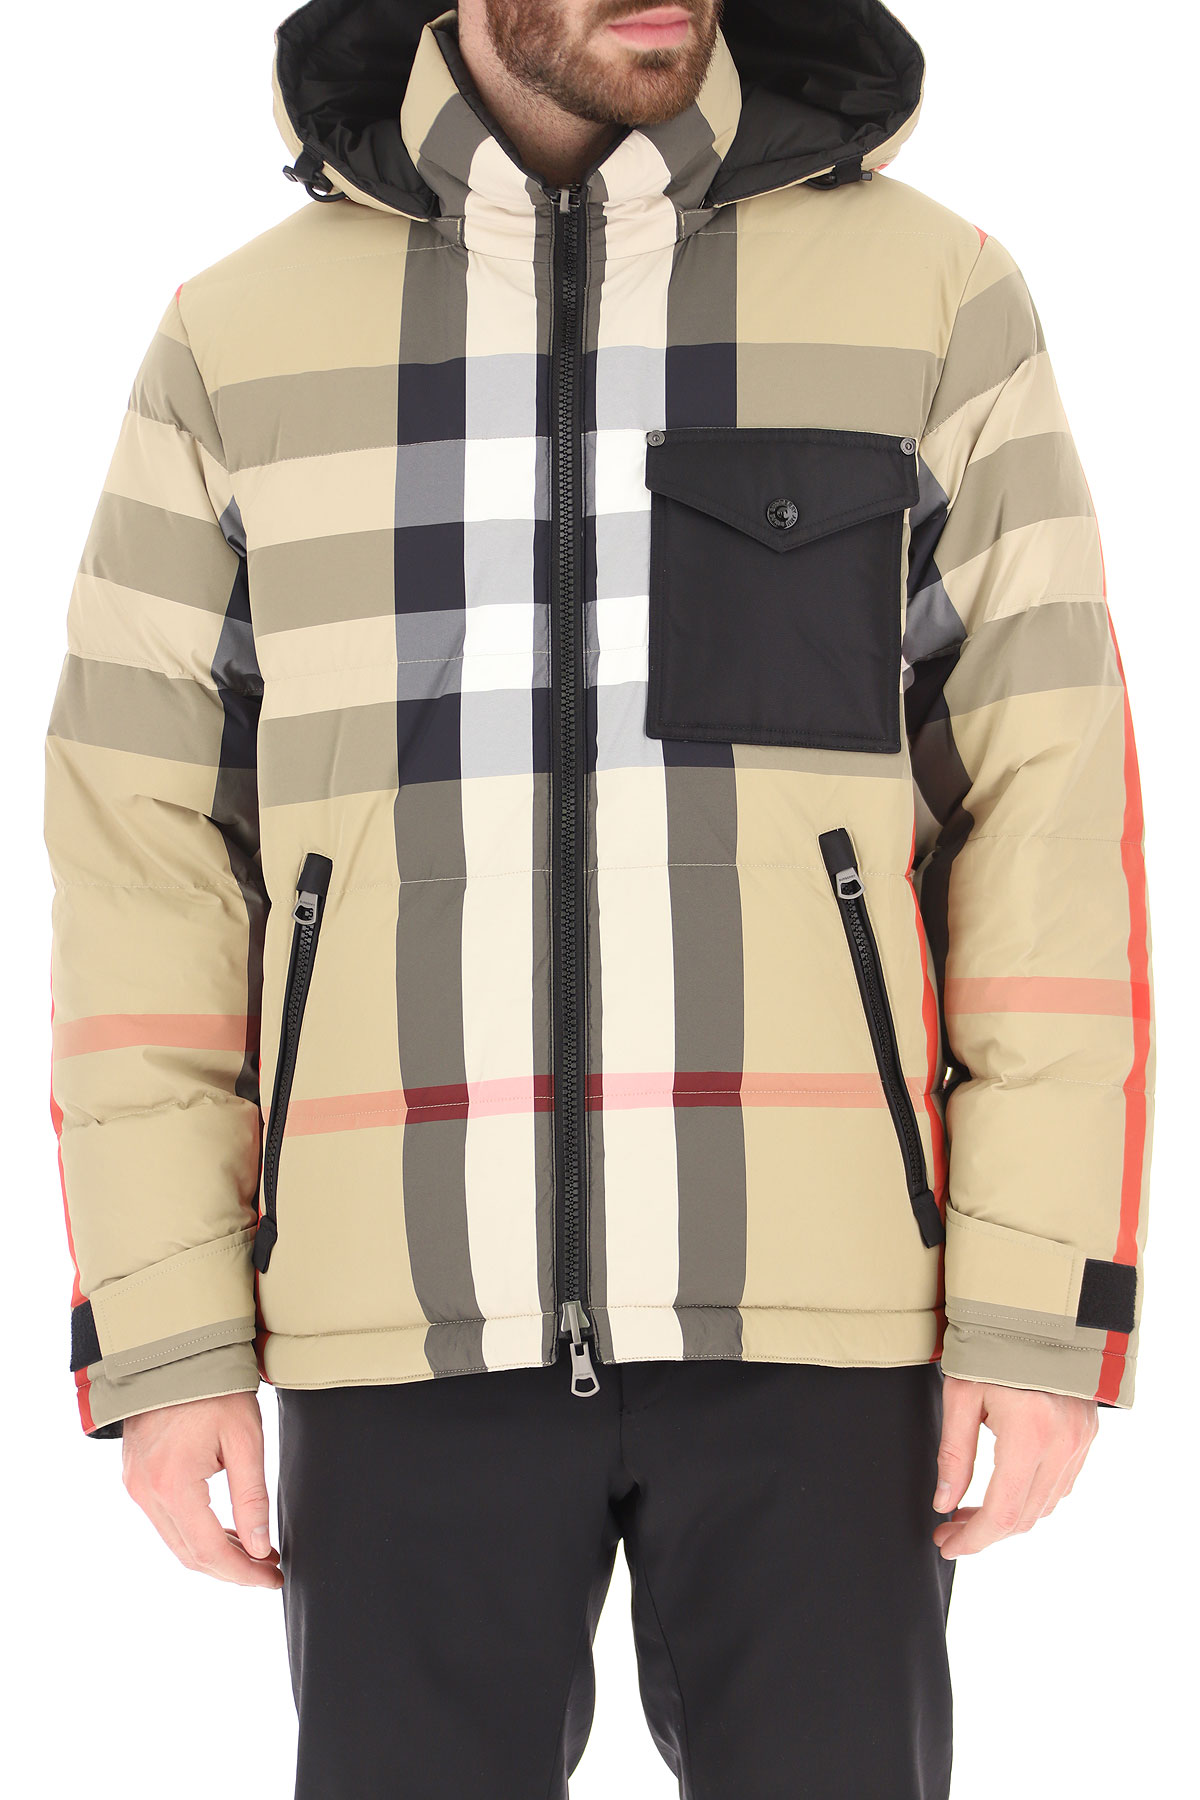 Mens Clothing Burberry, Style code: 8033115-a7028-